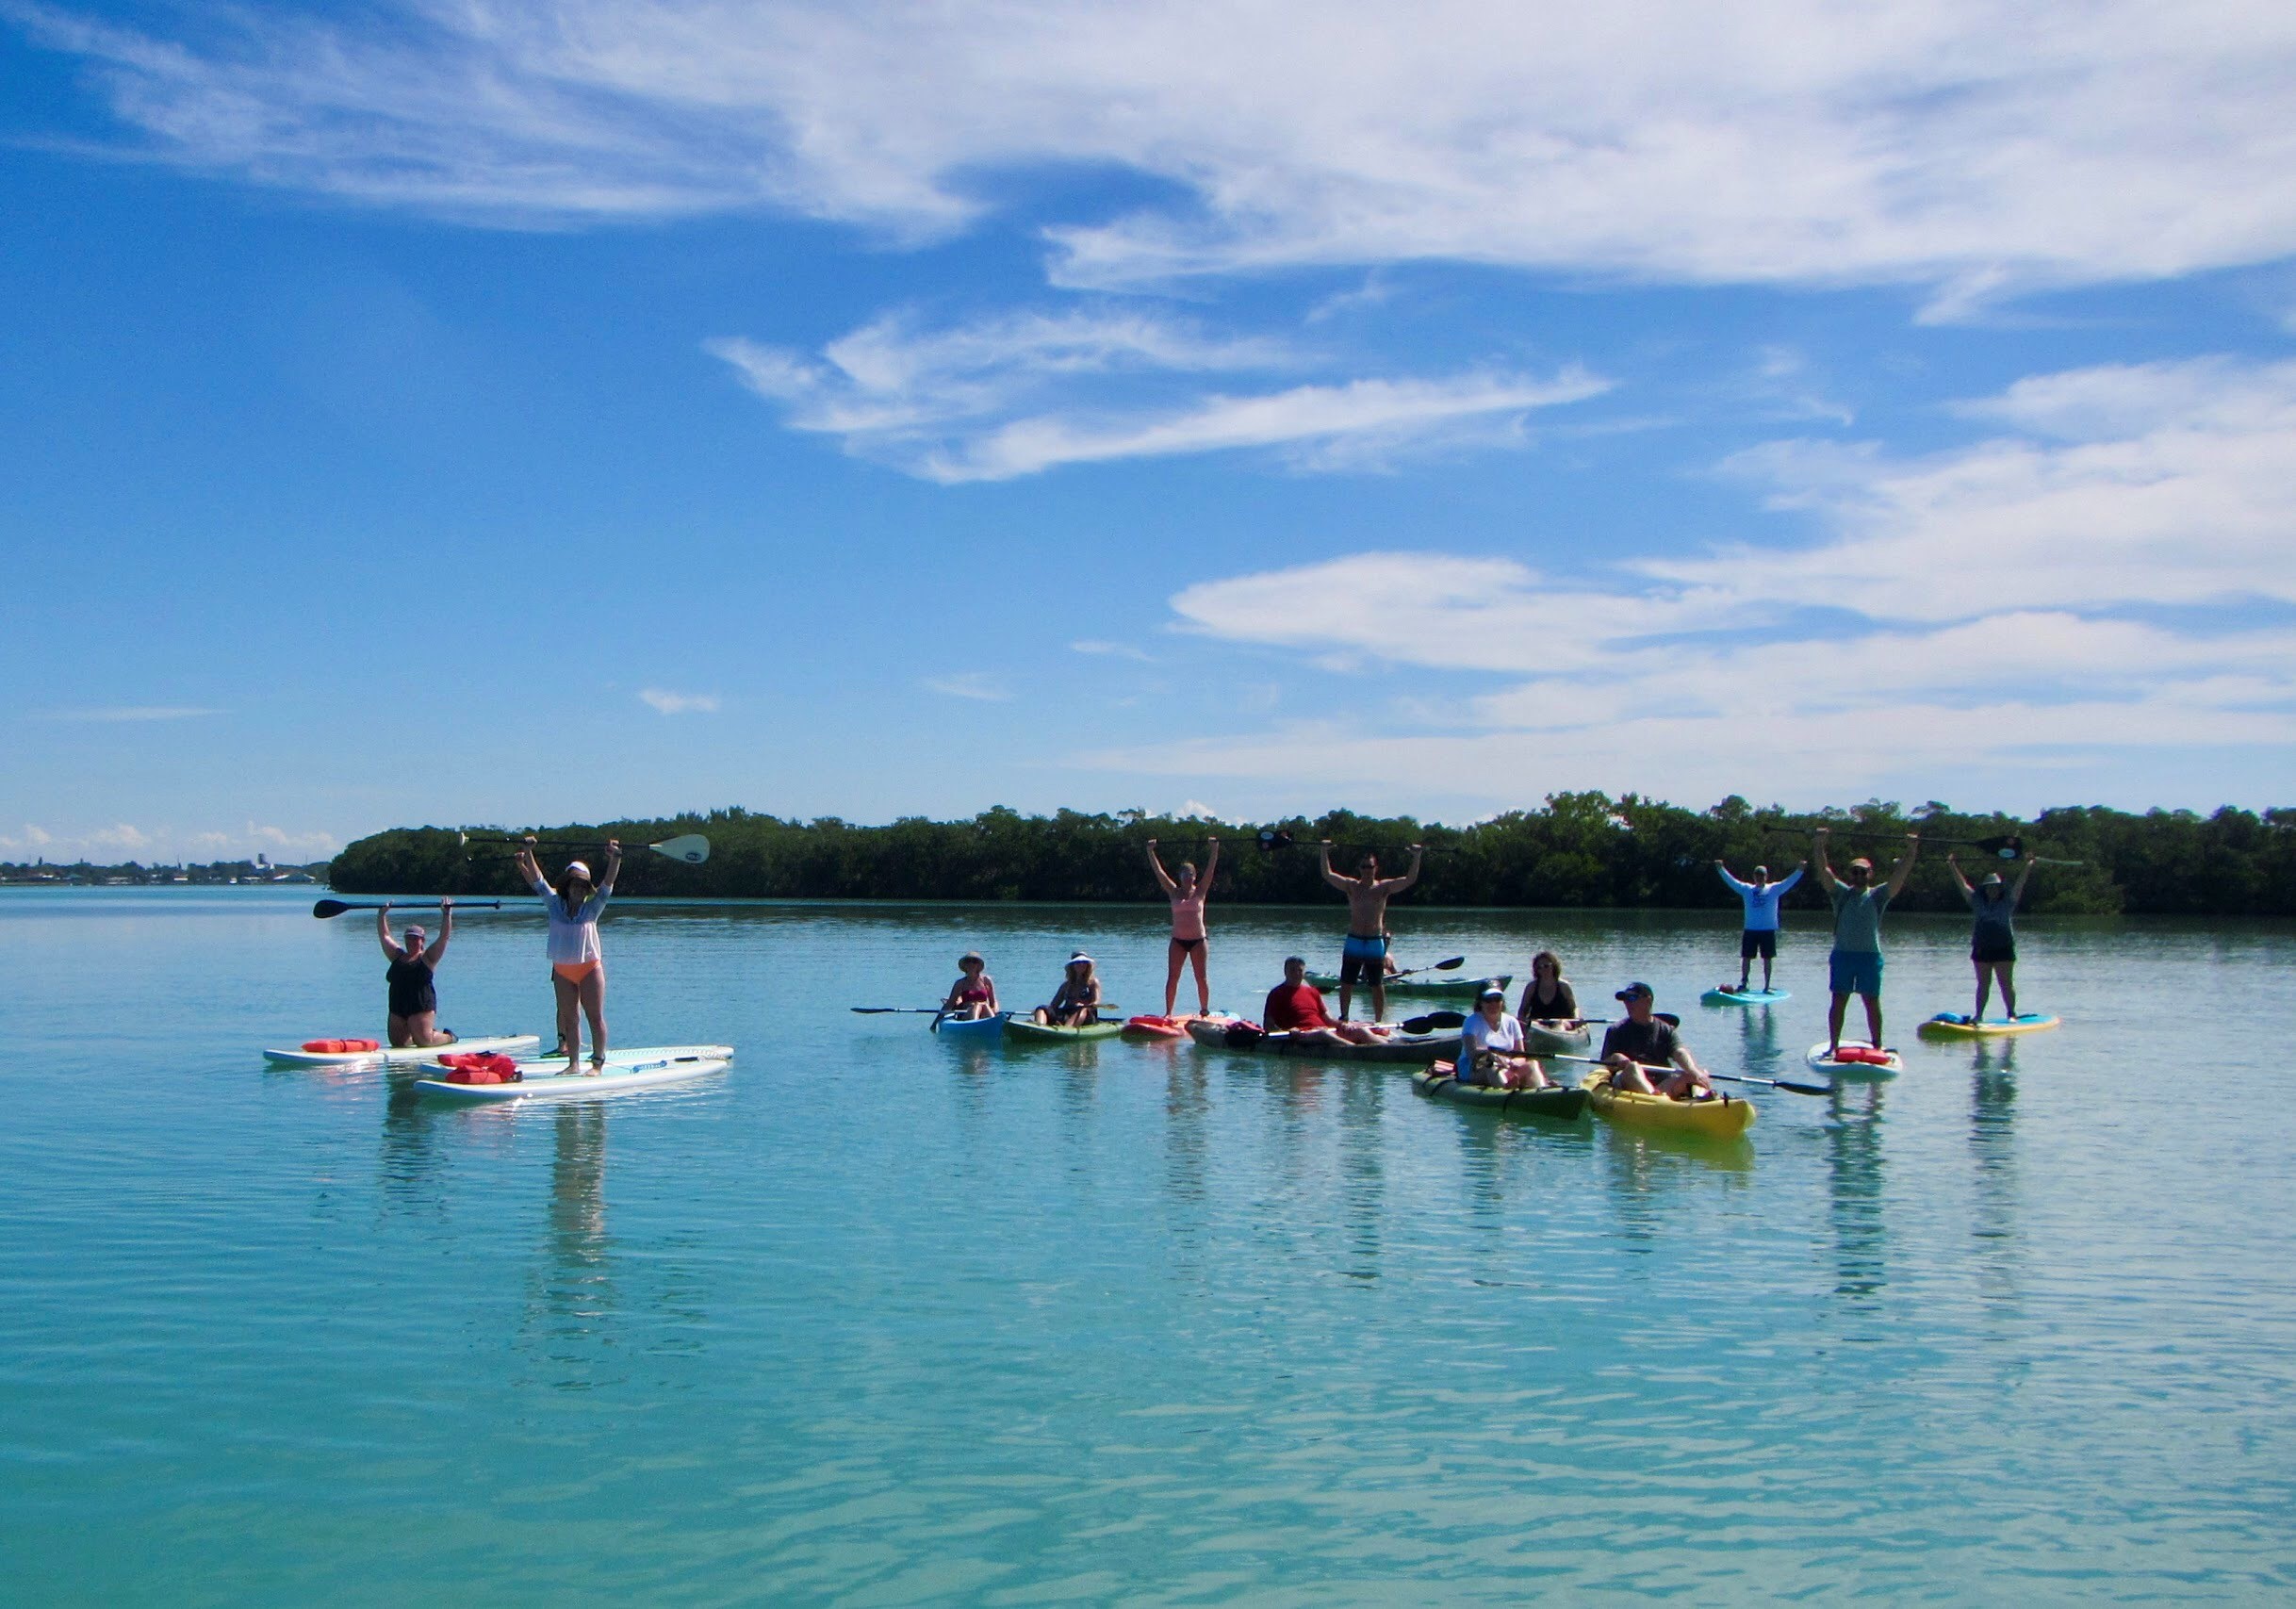 Group of people on kayaks and paddleboards in the water